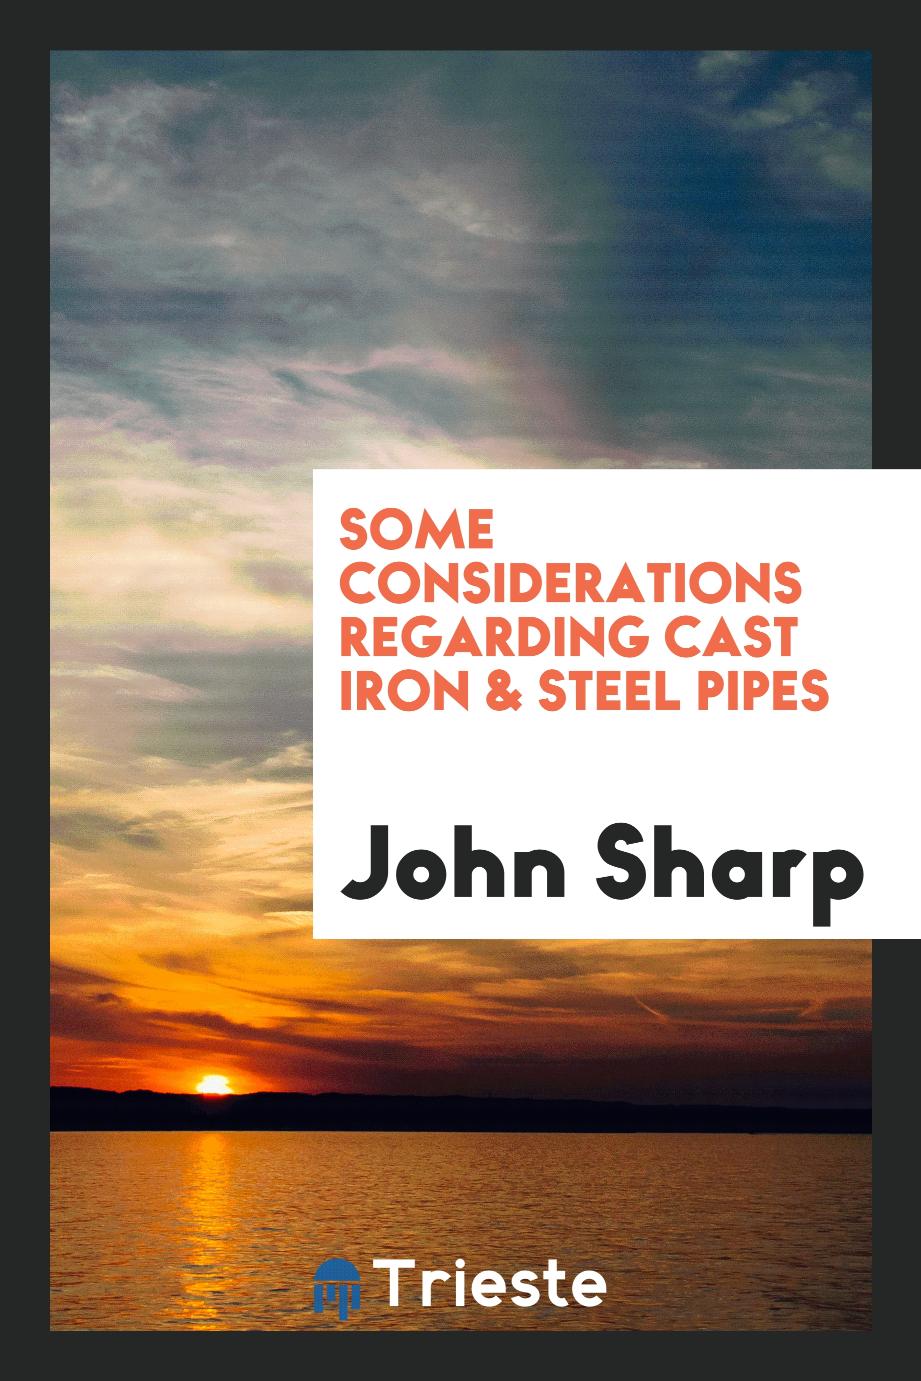 Some Considerations Regarding Cast Iron & Steel Pipes